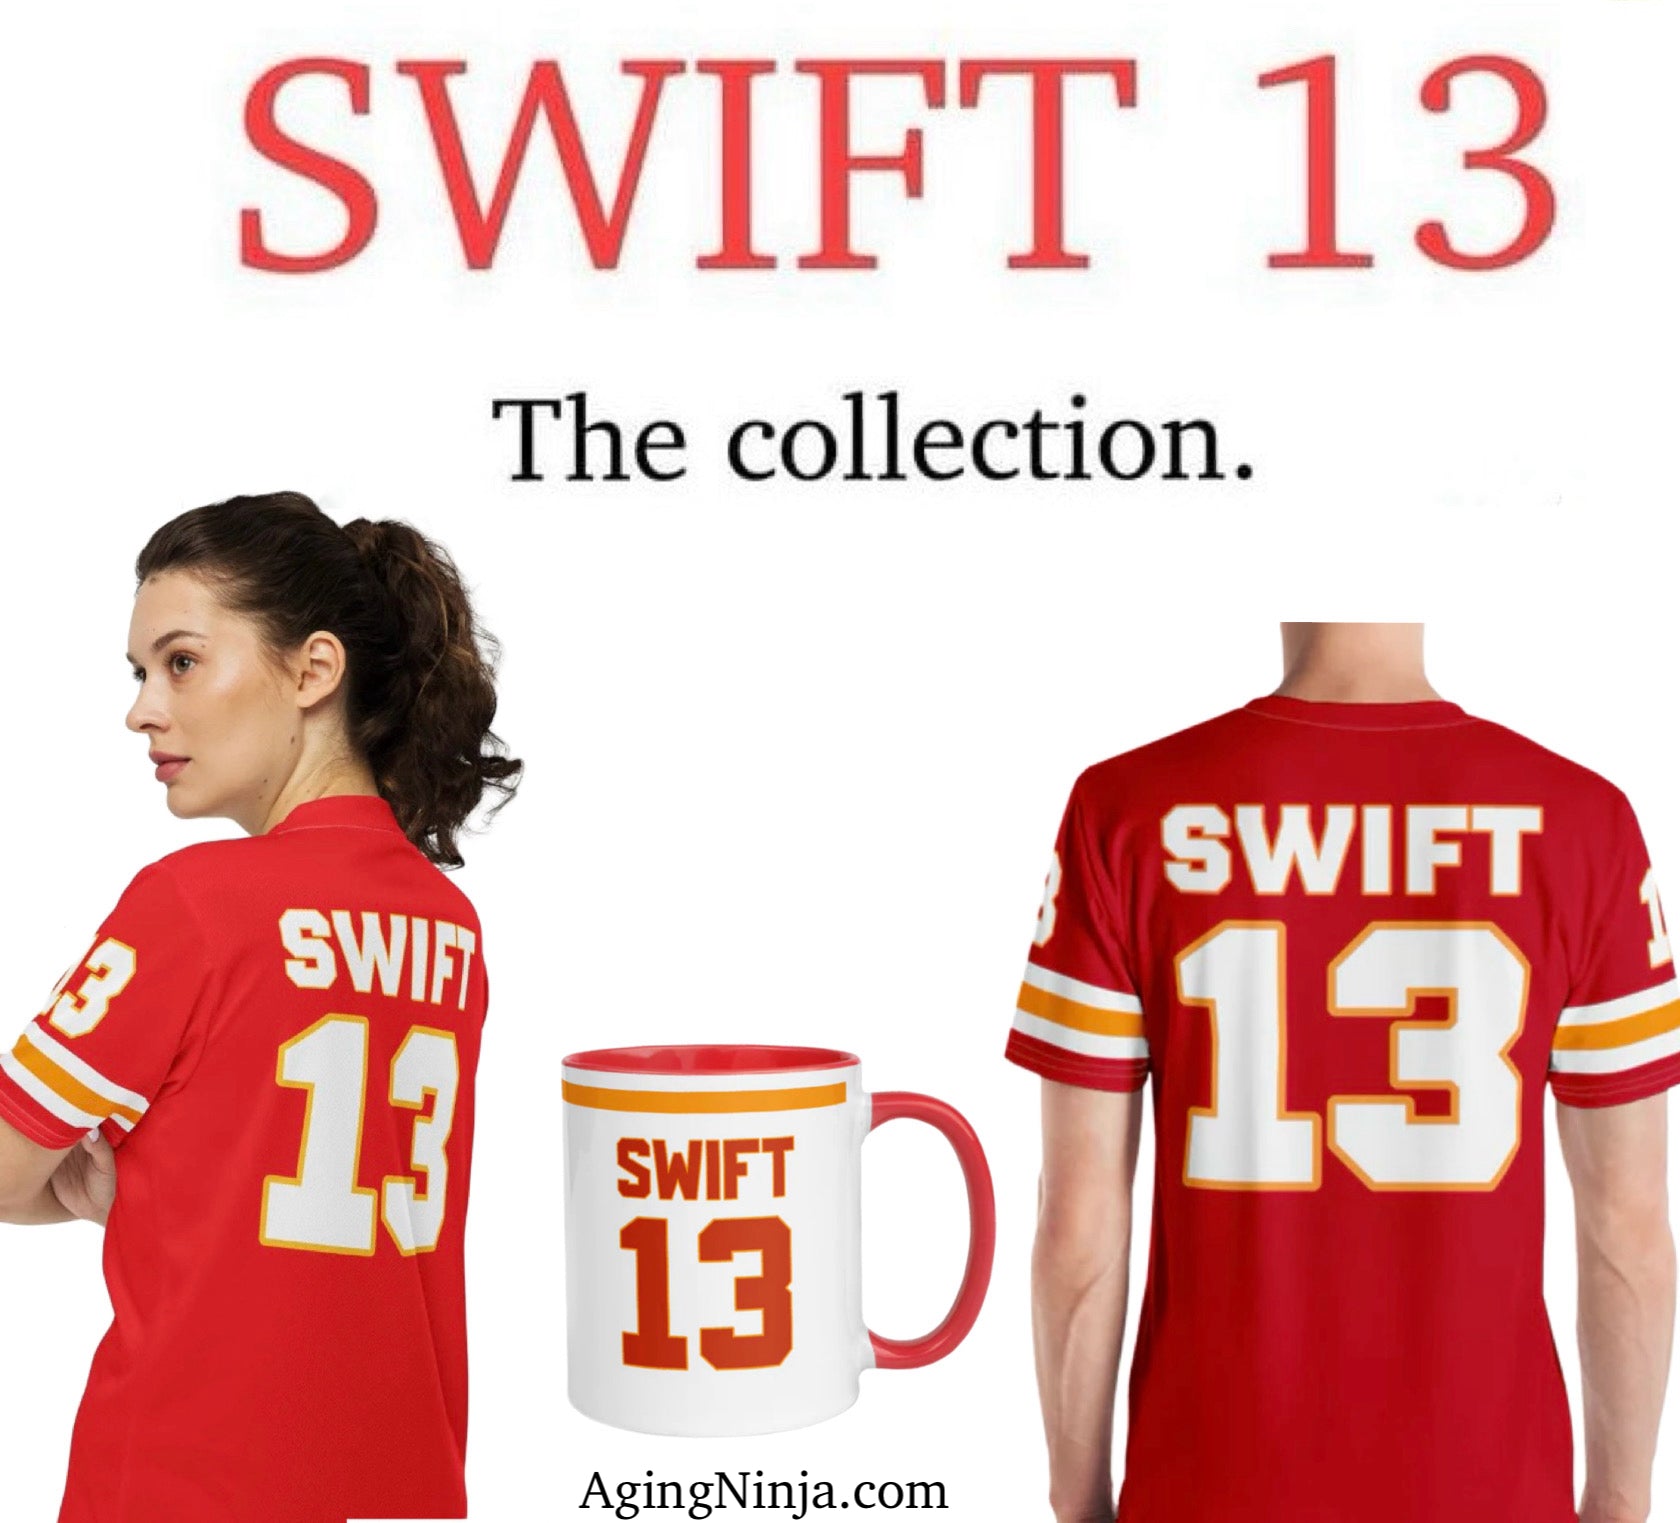 Swift 13 Jersey design is the gift they want